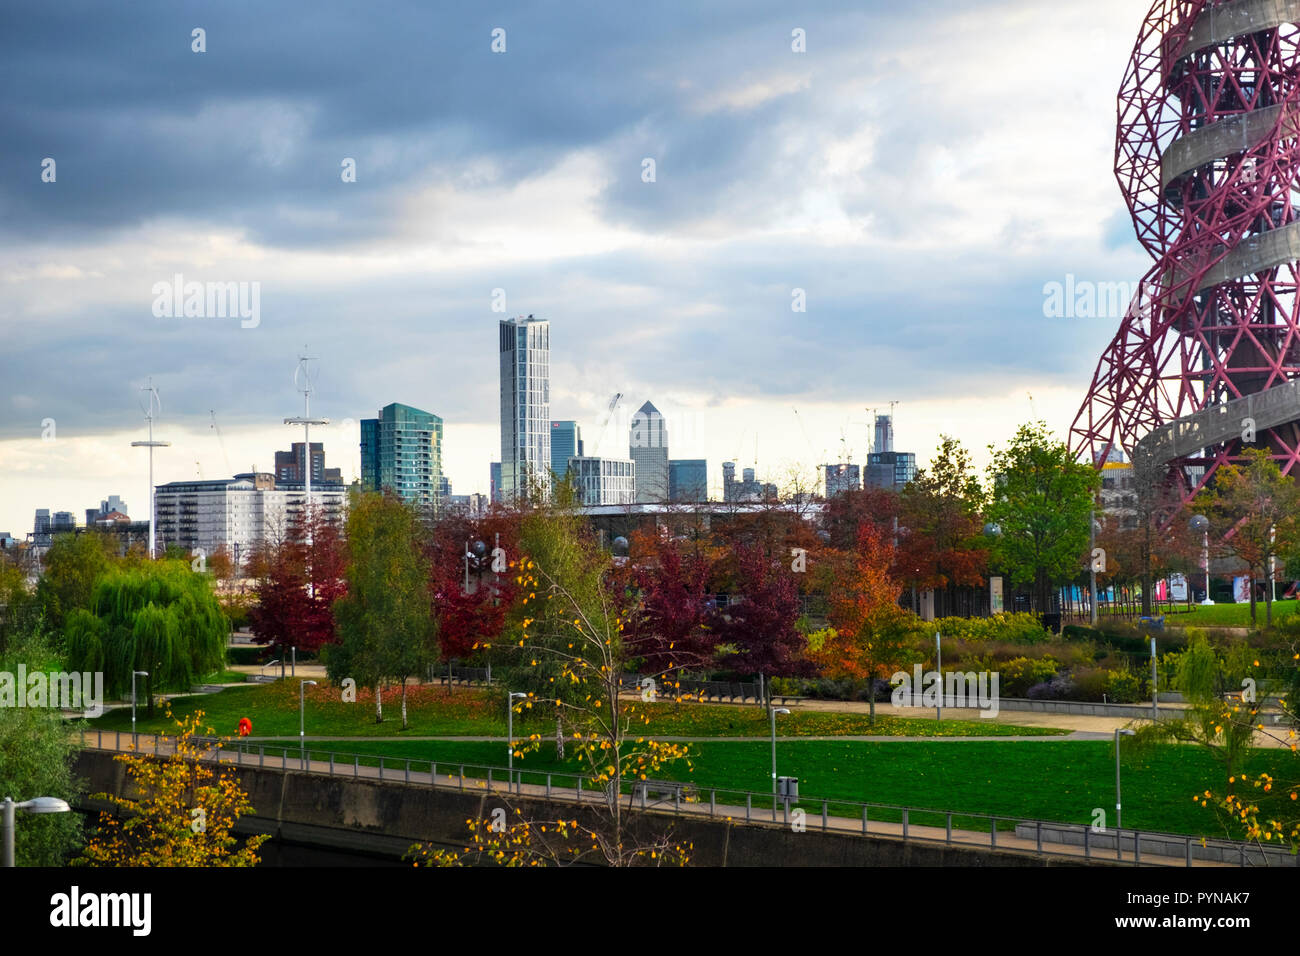 Olympic park in autumn, queen elizabeth park, ArcelorMittal Orbit, canary wharf, Stratford, london, uk Stock Photo